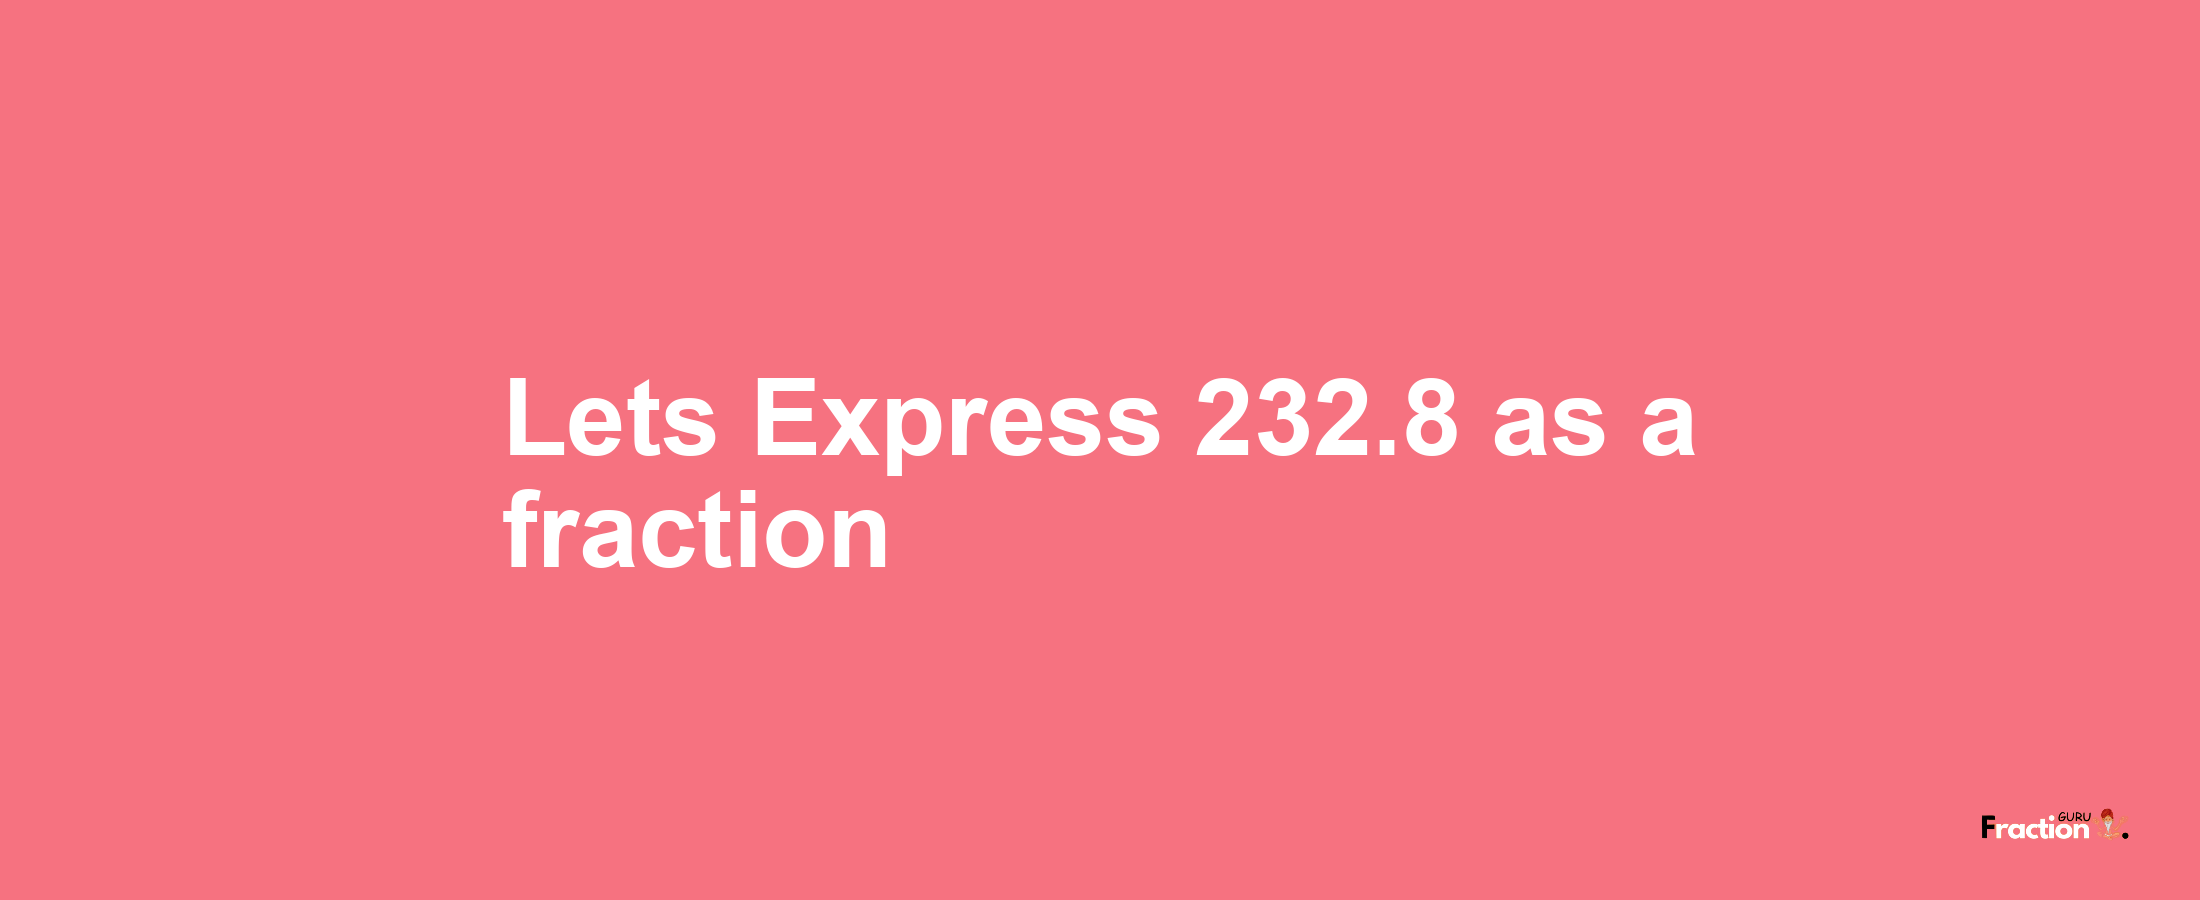 Lets Express 232.8 as afraction